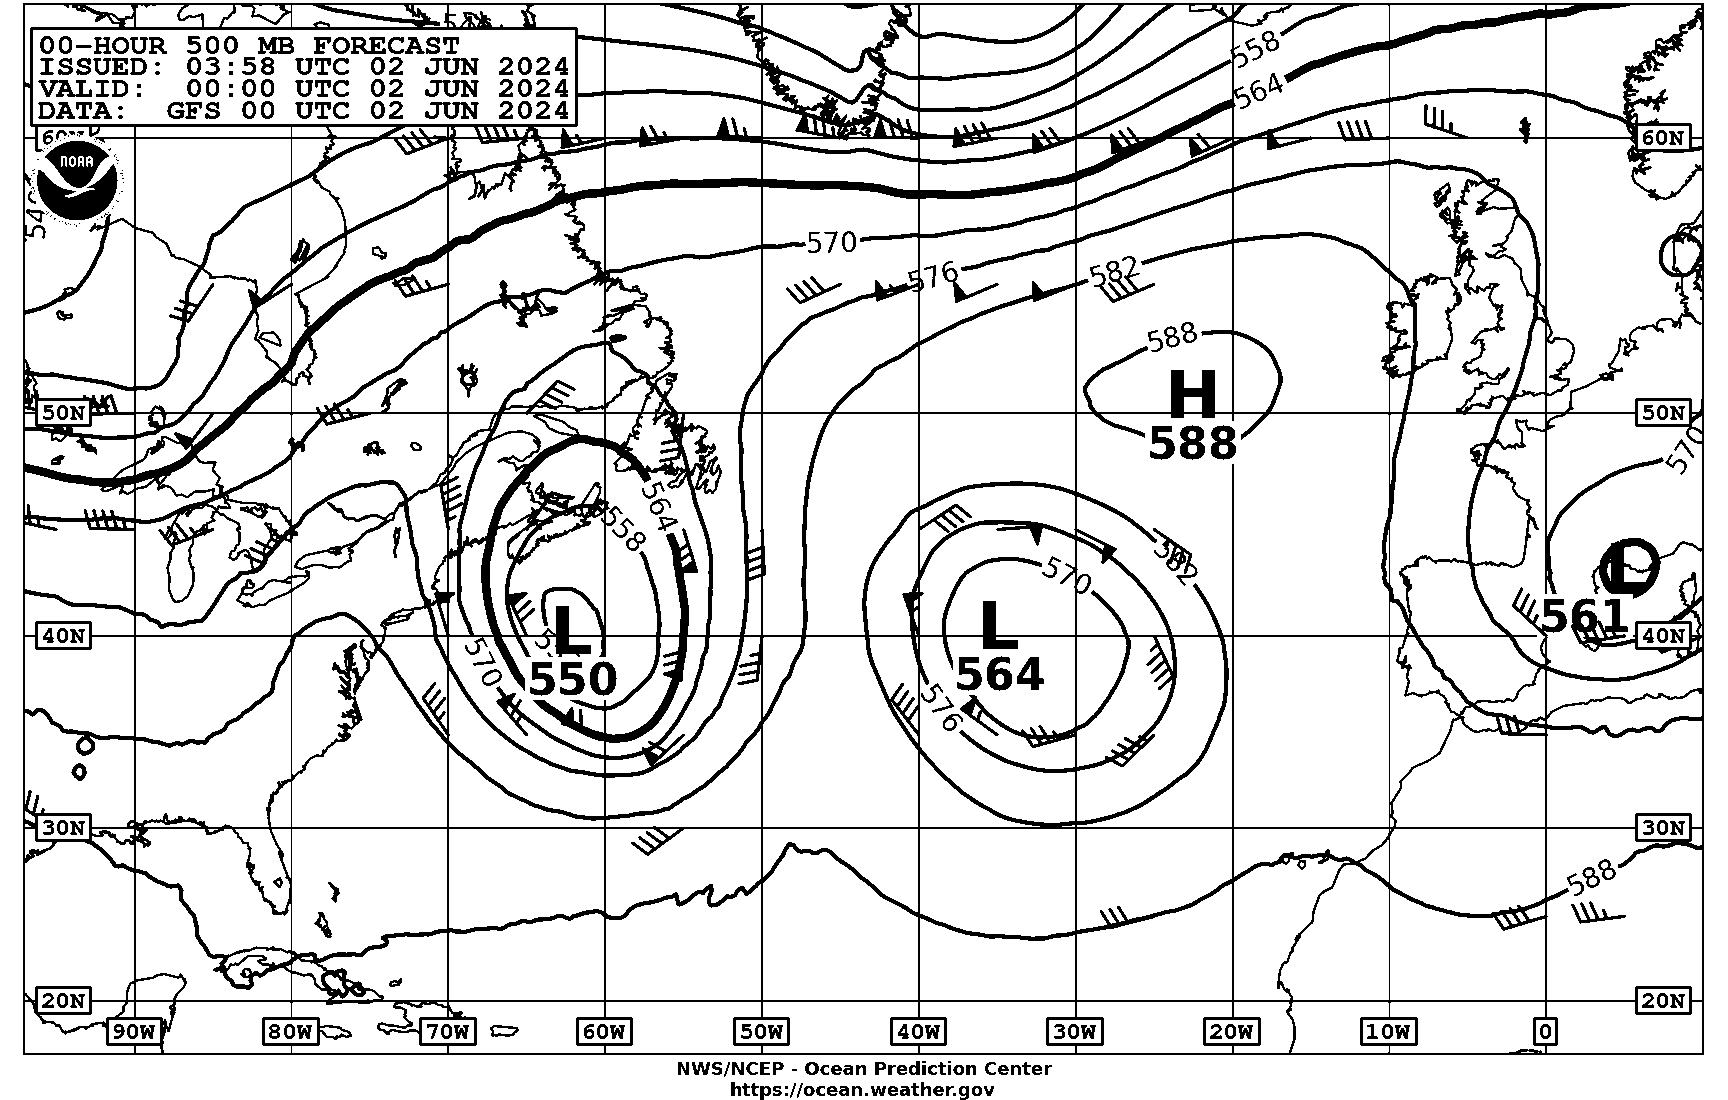 Image of 500-mb Forecasts